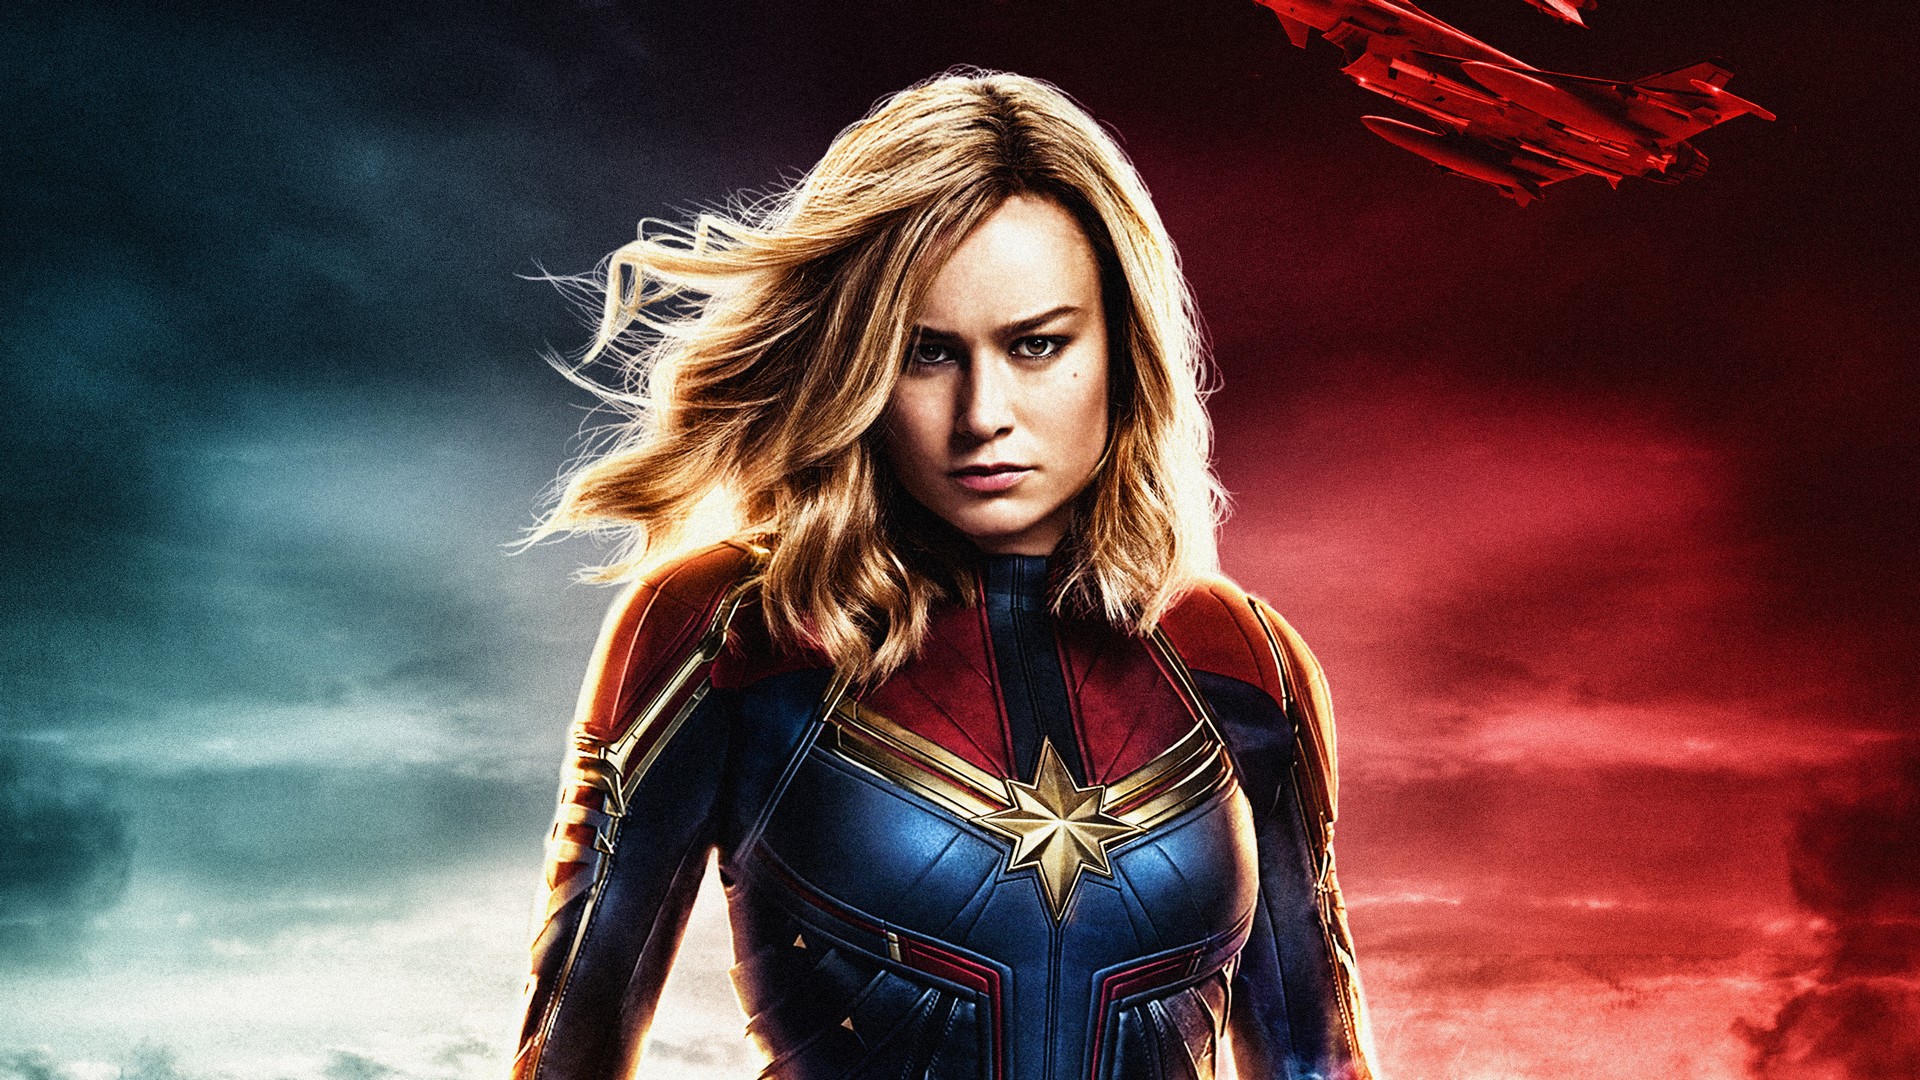 Captain Marvel 2019 Trailer Wallpaper with high-resolution 1920x1080 pixel. You can use this poster wallpaper for your Desktop Computers, Mac Screensavers, Windows Backgrounds, iPhone Wallpapers, Tablet or Android Lock screen and another Mobile device